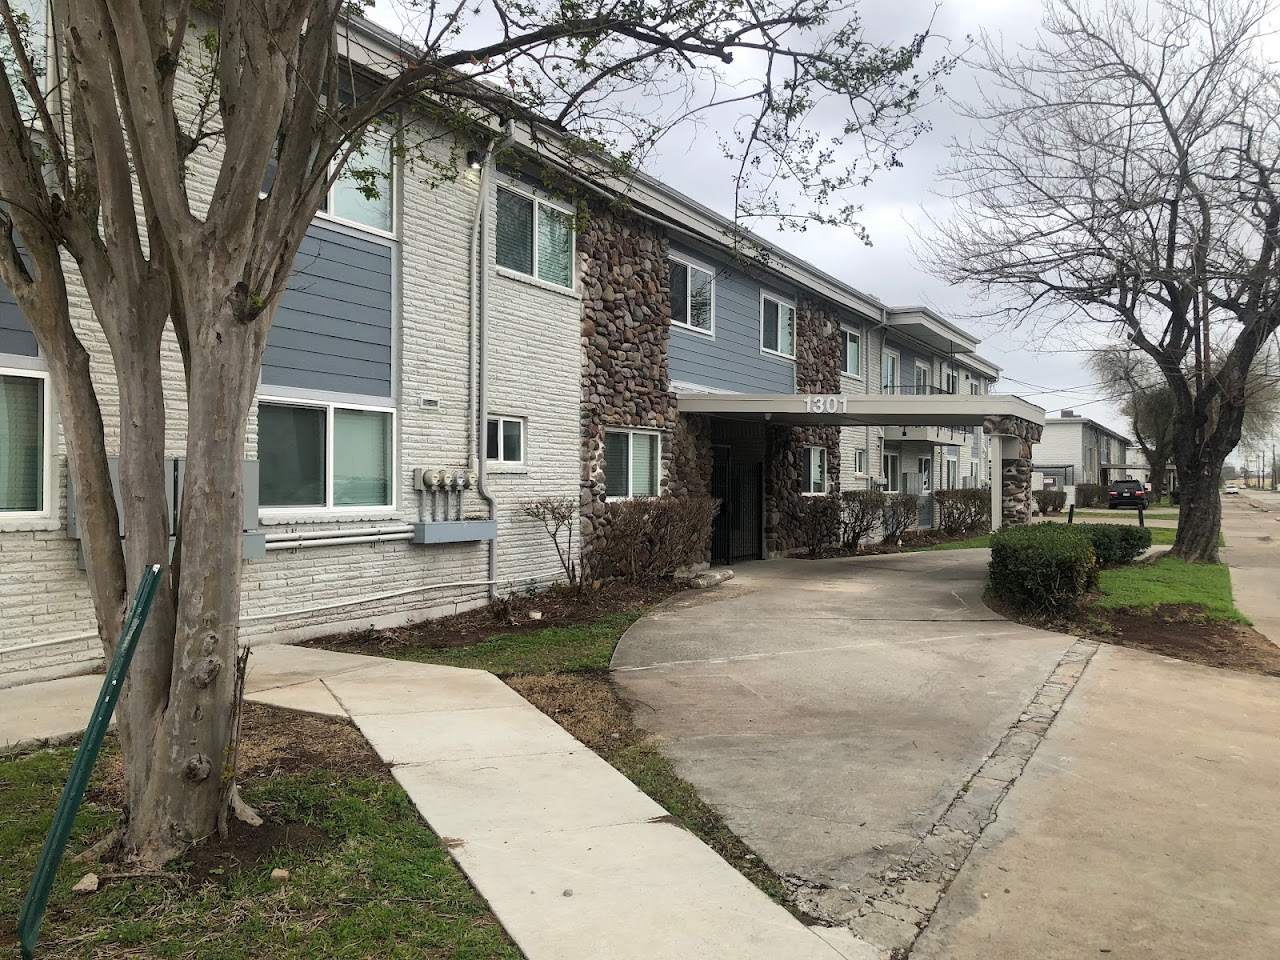 Photo of GRANADA TERRACE APARTMENTS. Affordable housing located at 1301 AVENUE A SOUTH HOUSTON, TX 77587